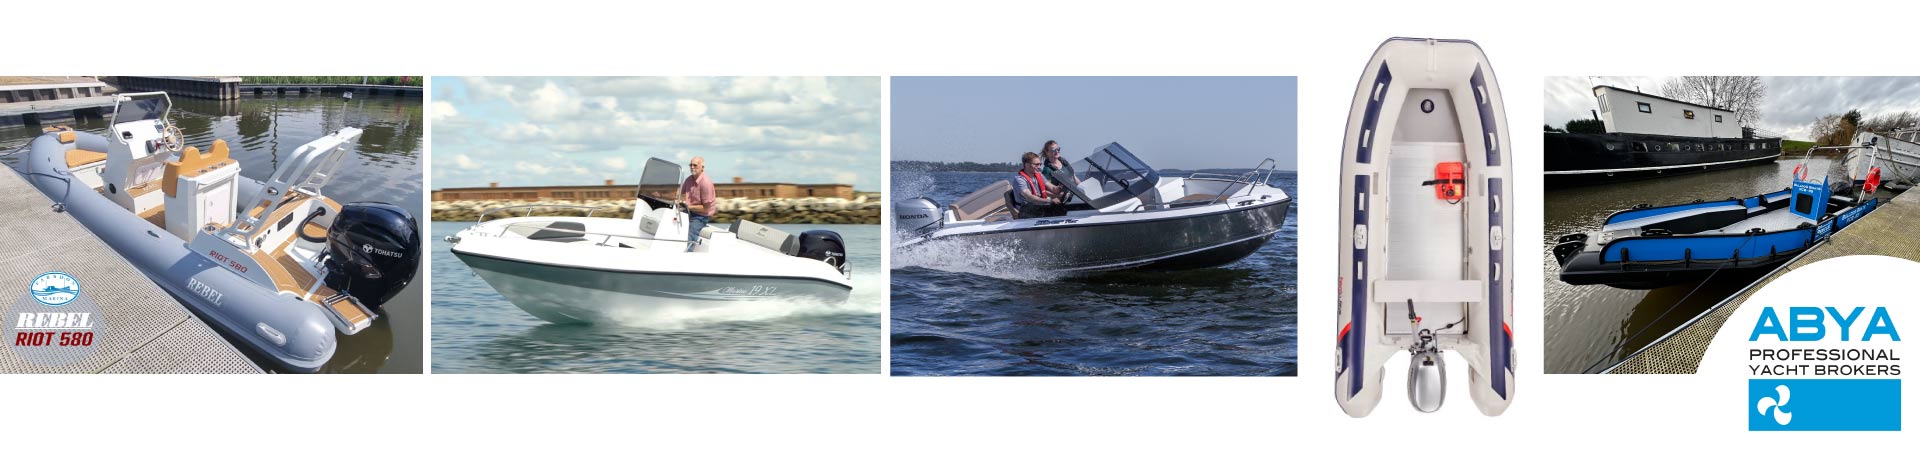 Join Farndon Marina on May 18th & 19th For Boat Demos and More